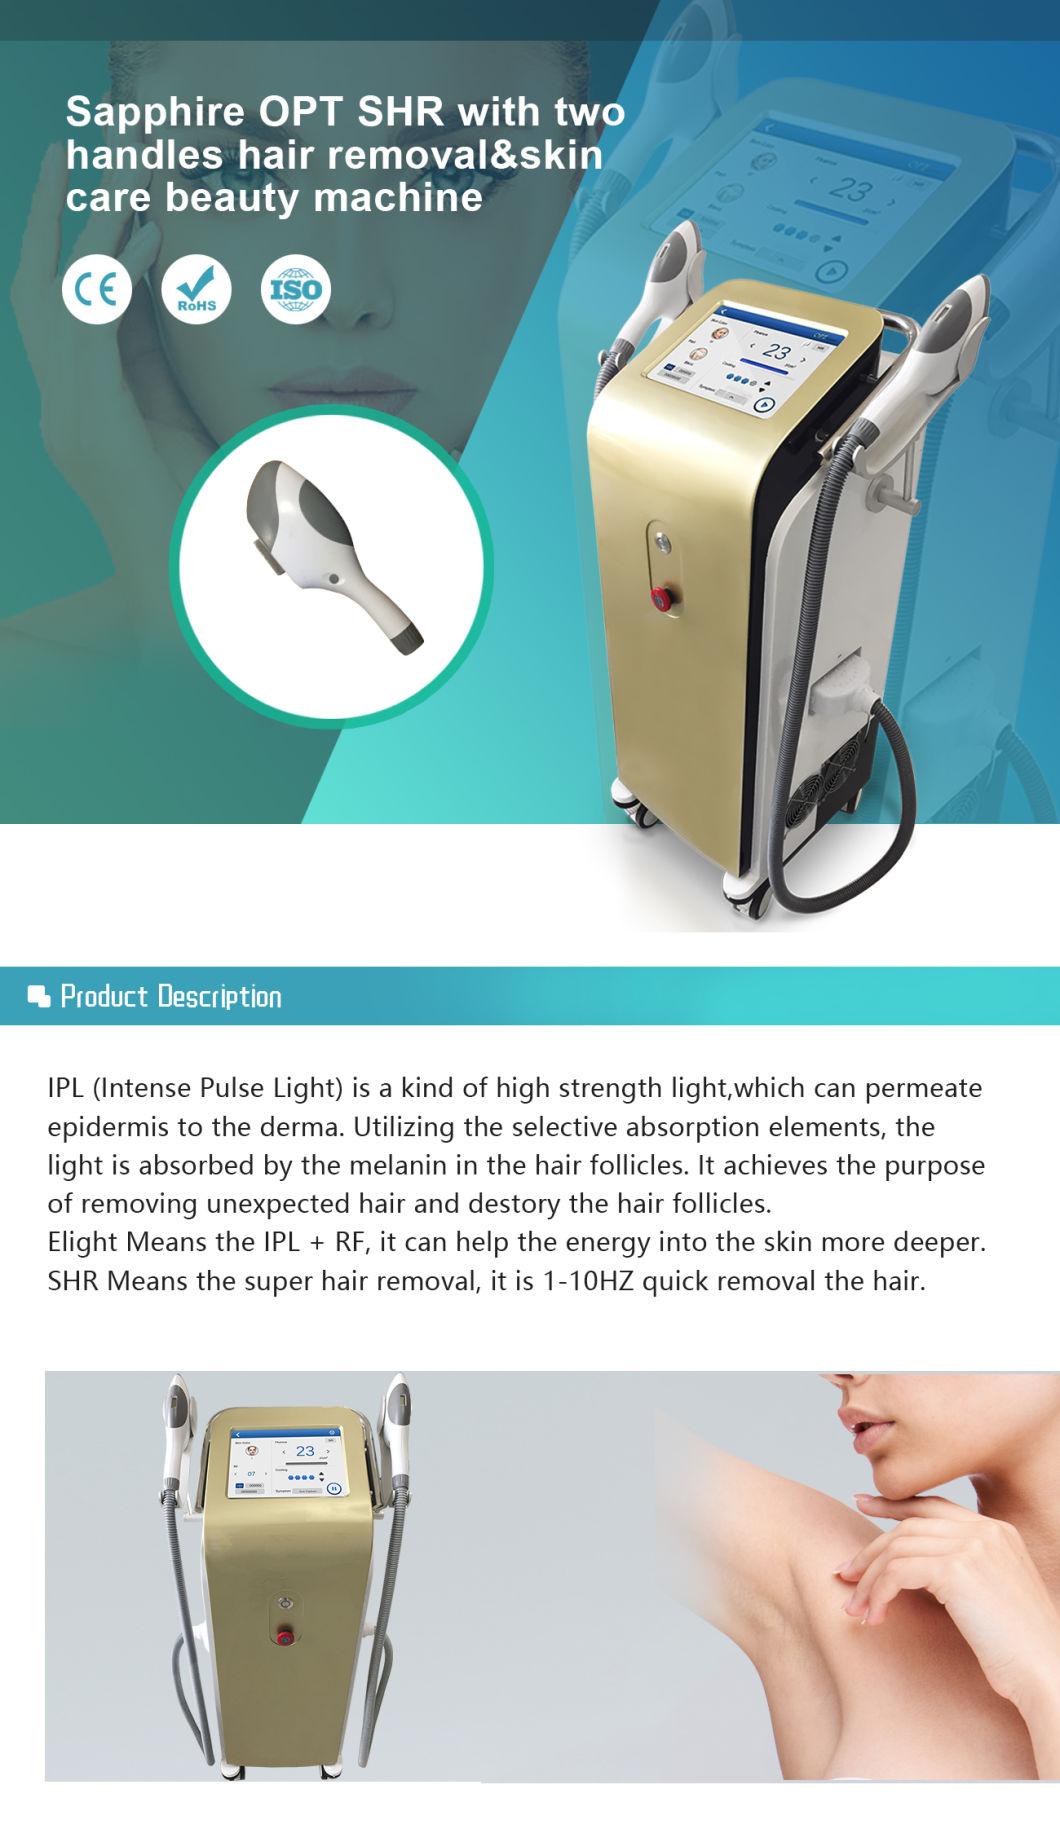 New Style Shr/Opt/IPL Multifunctional Hair Removal Machine with Cooling System